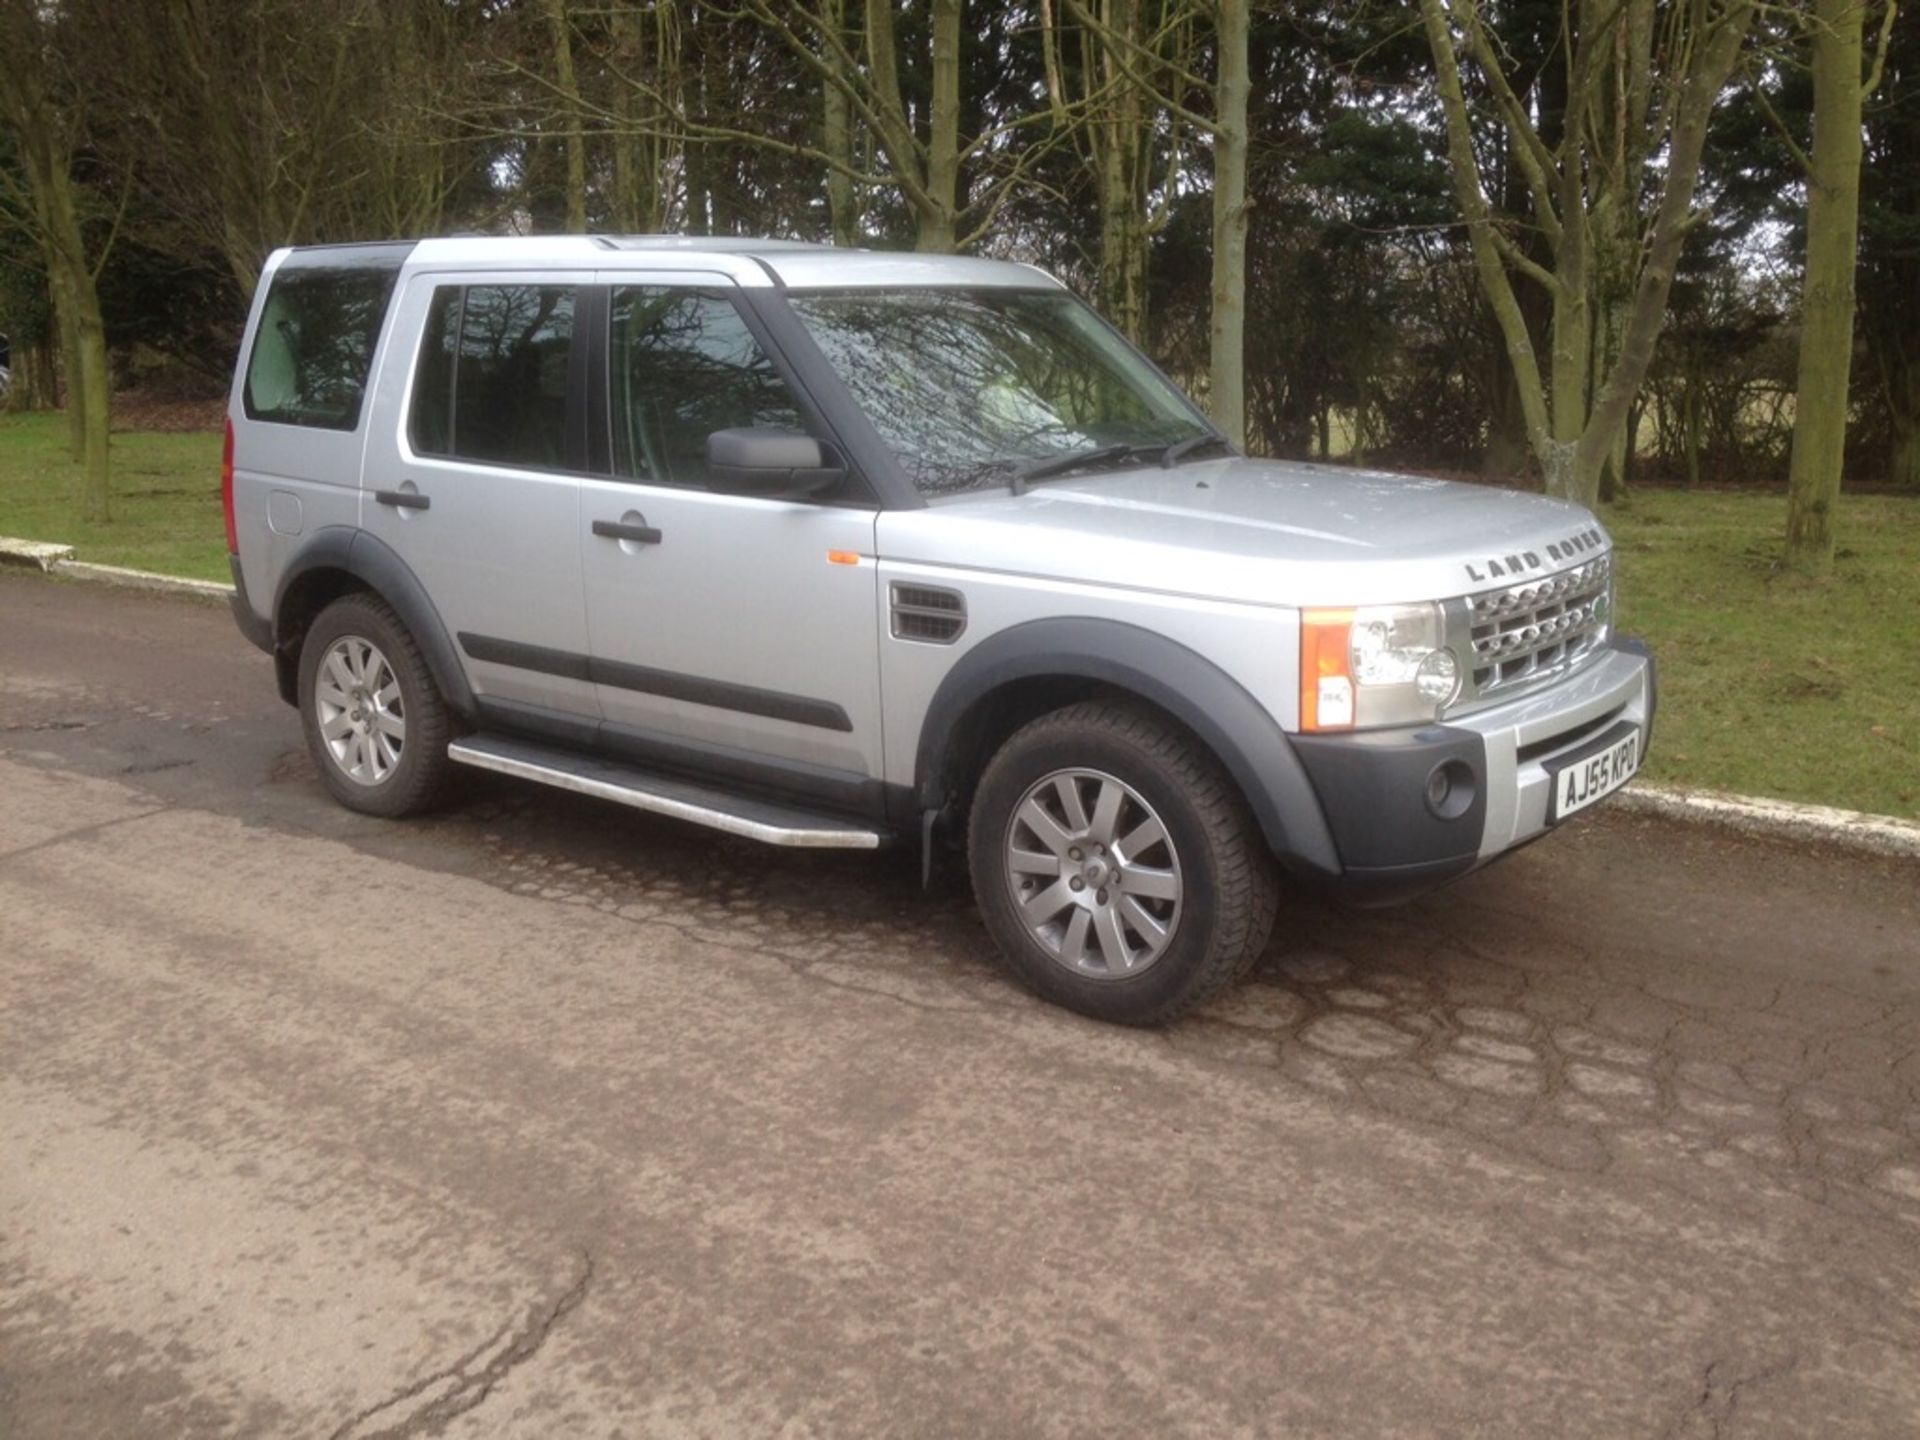 LAND ROVER DISCOVERY 2005 55 REG  V5 PRESENT APPROX 119k     COLLECTION FROM ESSEX - Image 8 of 8